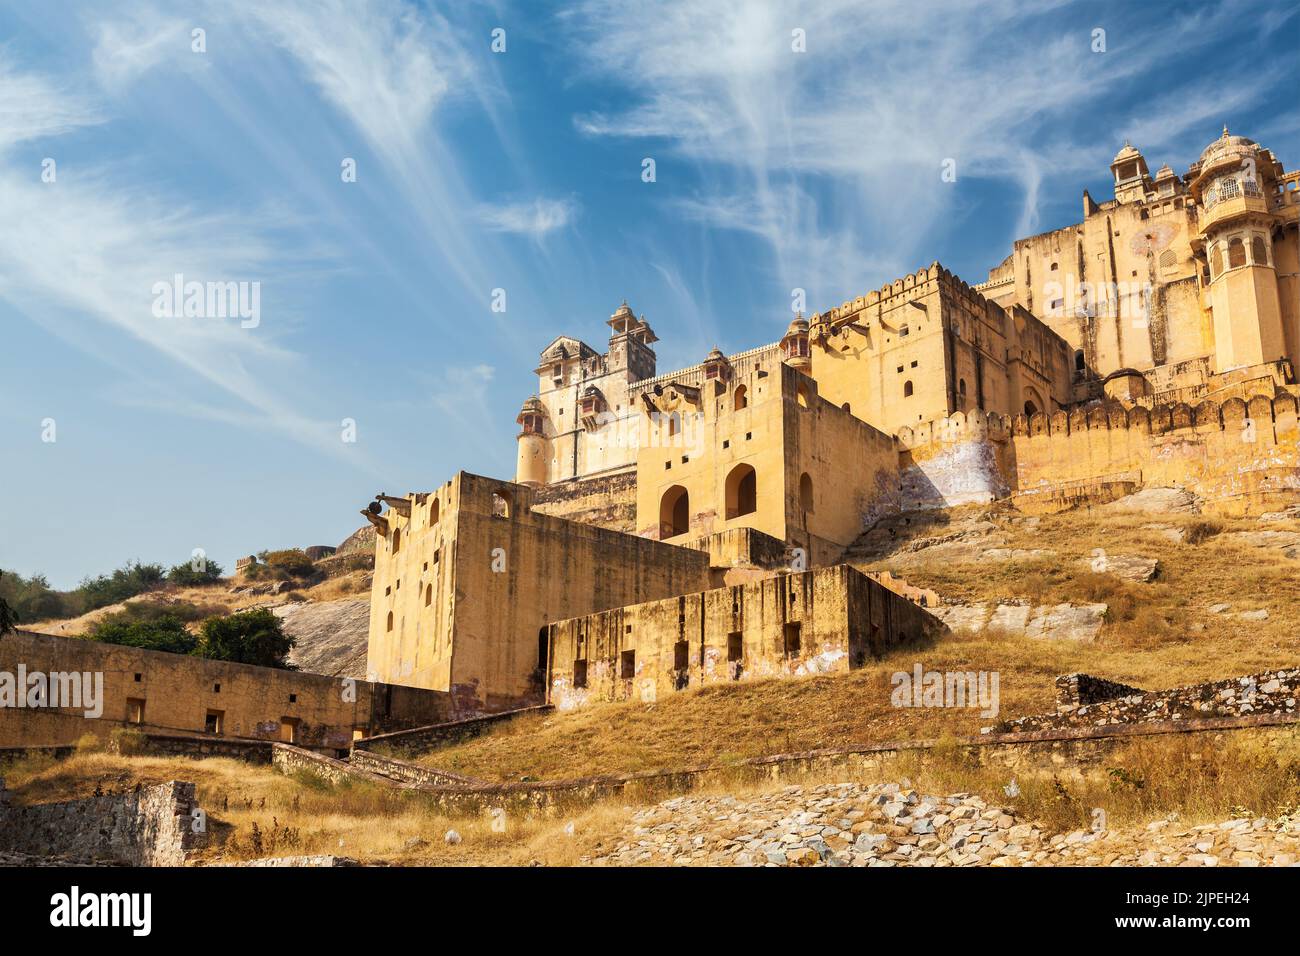 Amber Fort, amer Fort, Amber Forts Stockfoto